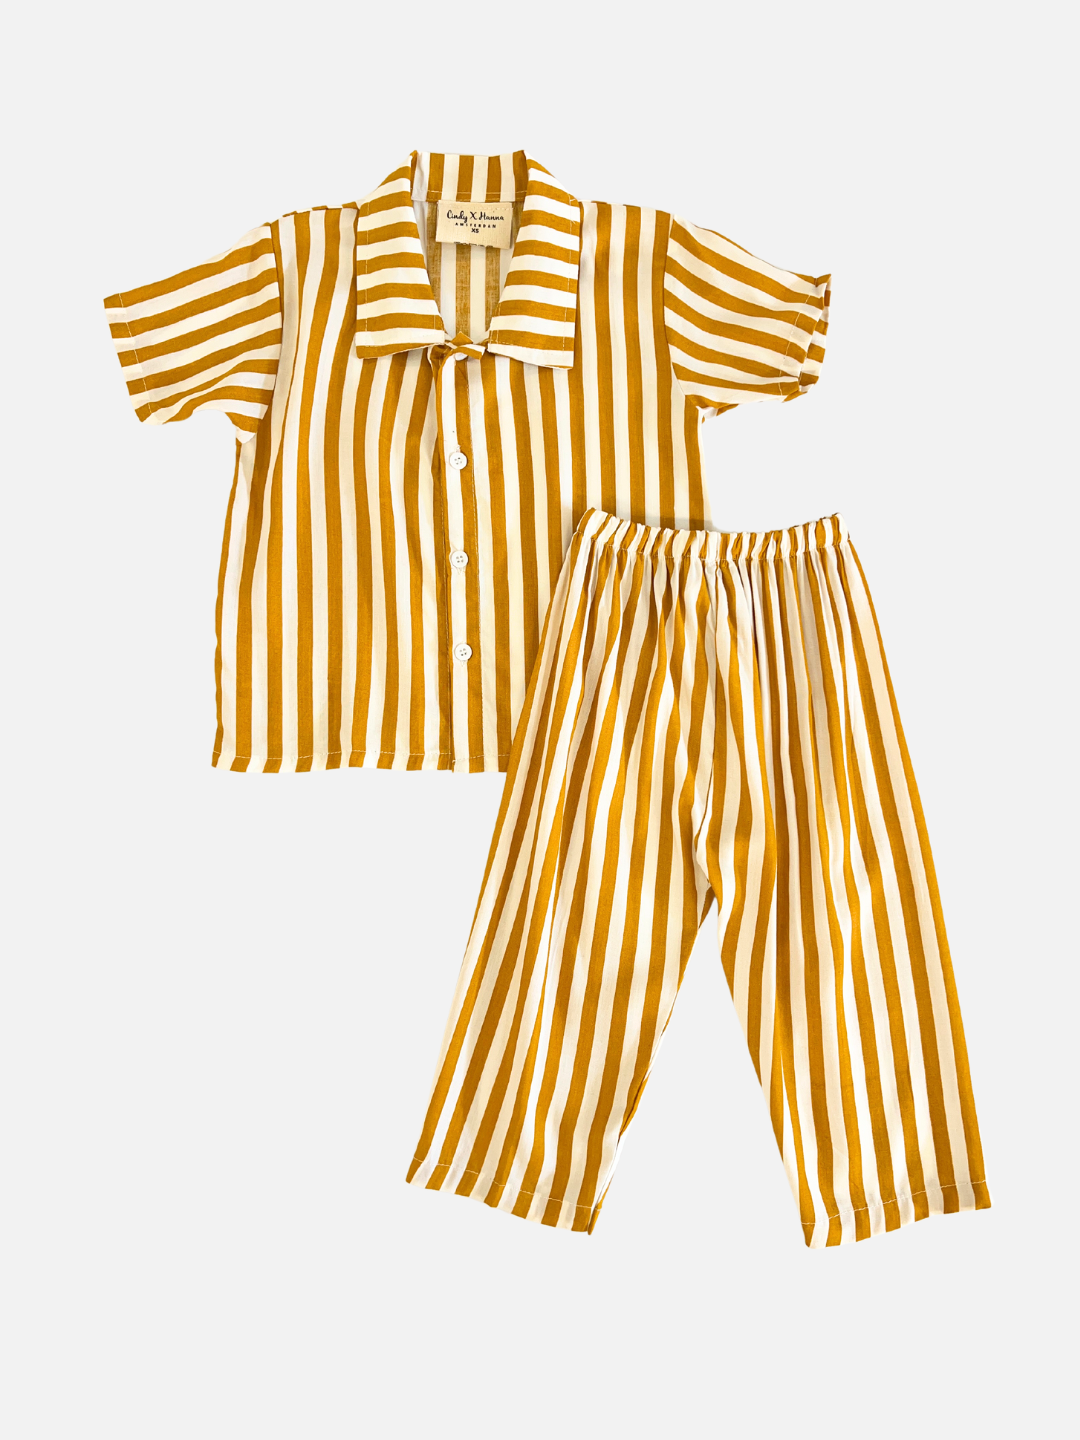 Front view of the Michi Pajamas